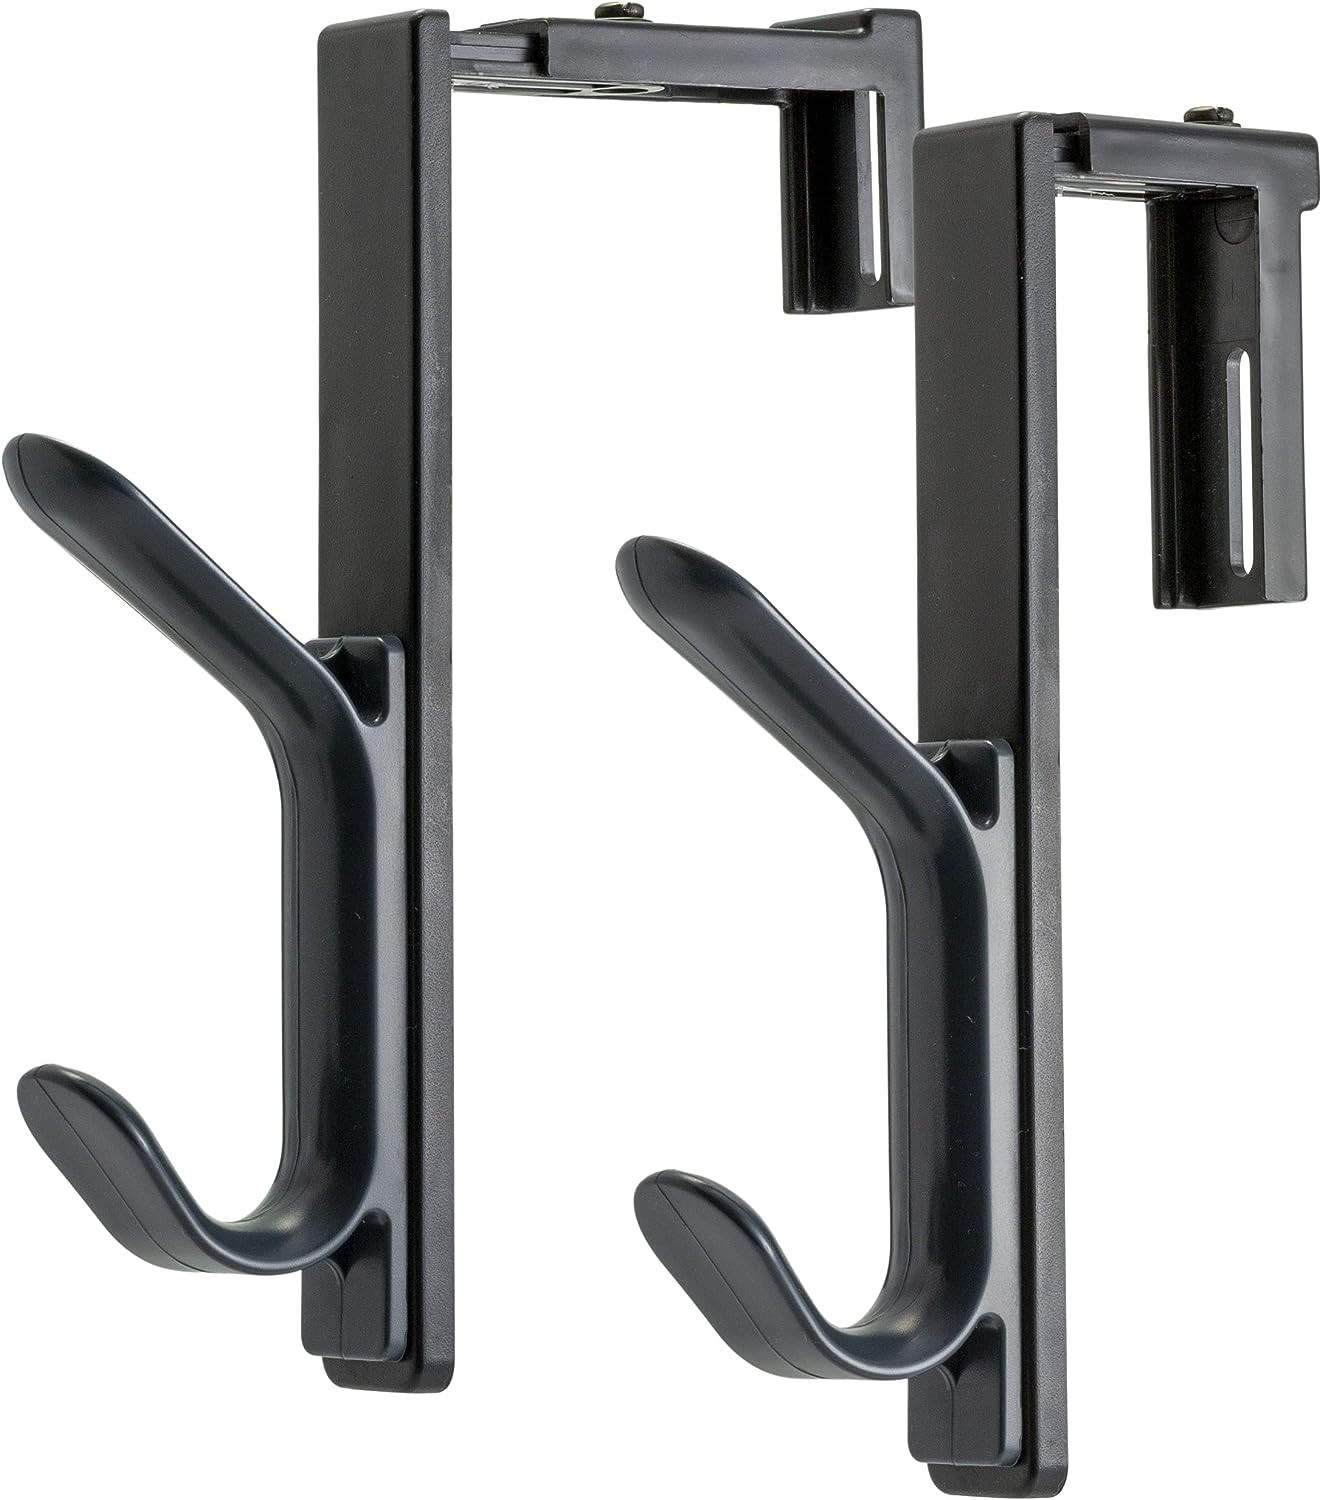 Officemate Double Coat Hooks for Cubicle Panels, Adjustable, Comes in 2 Pack  Black